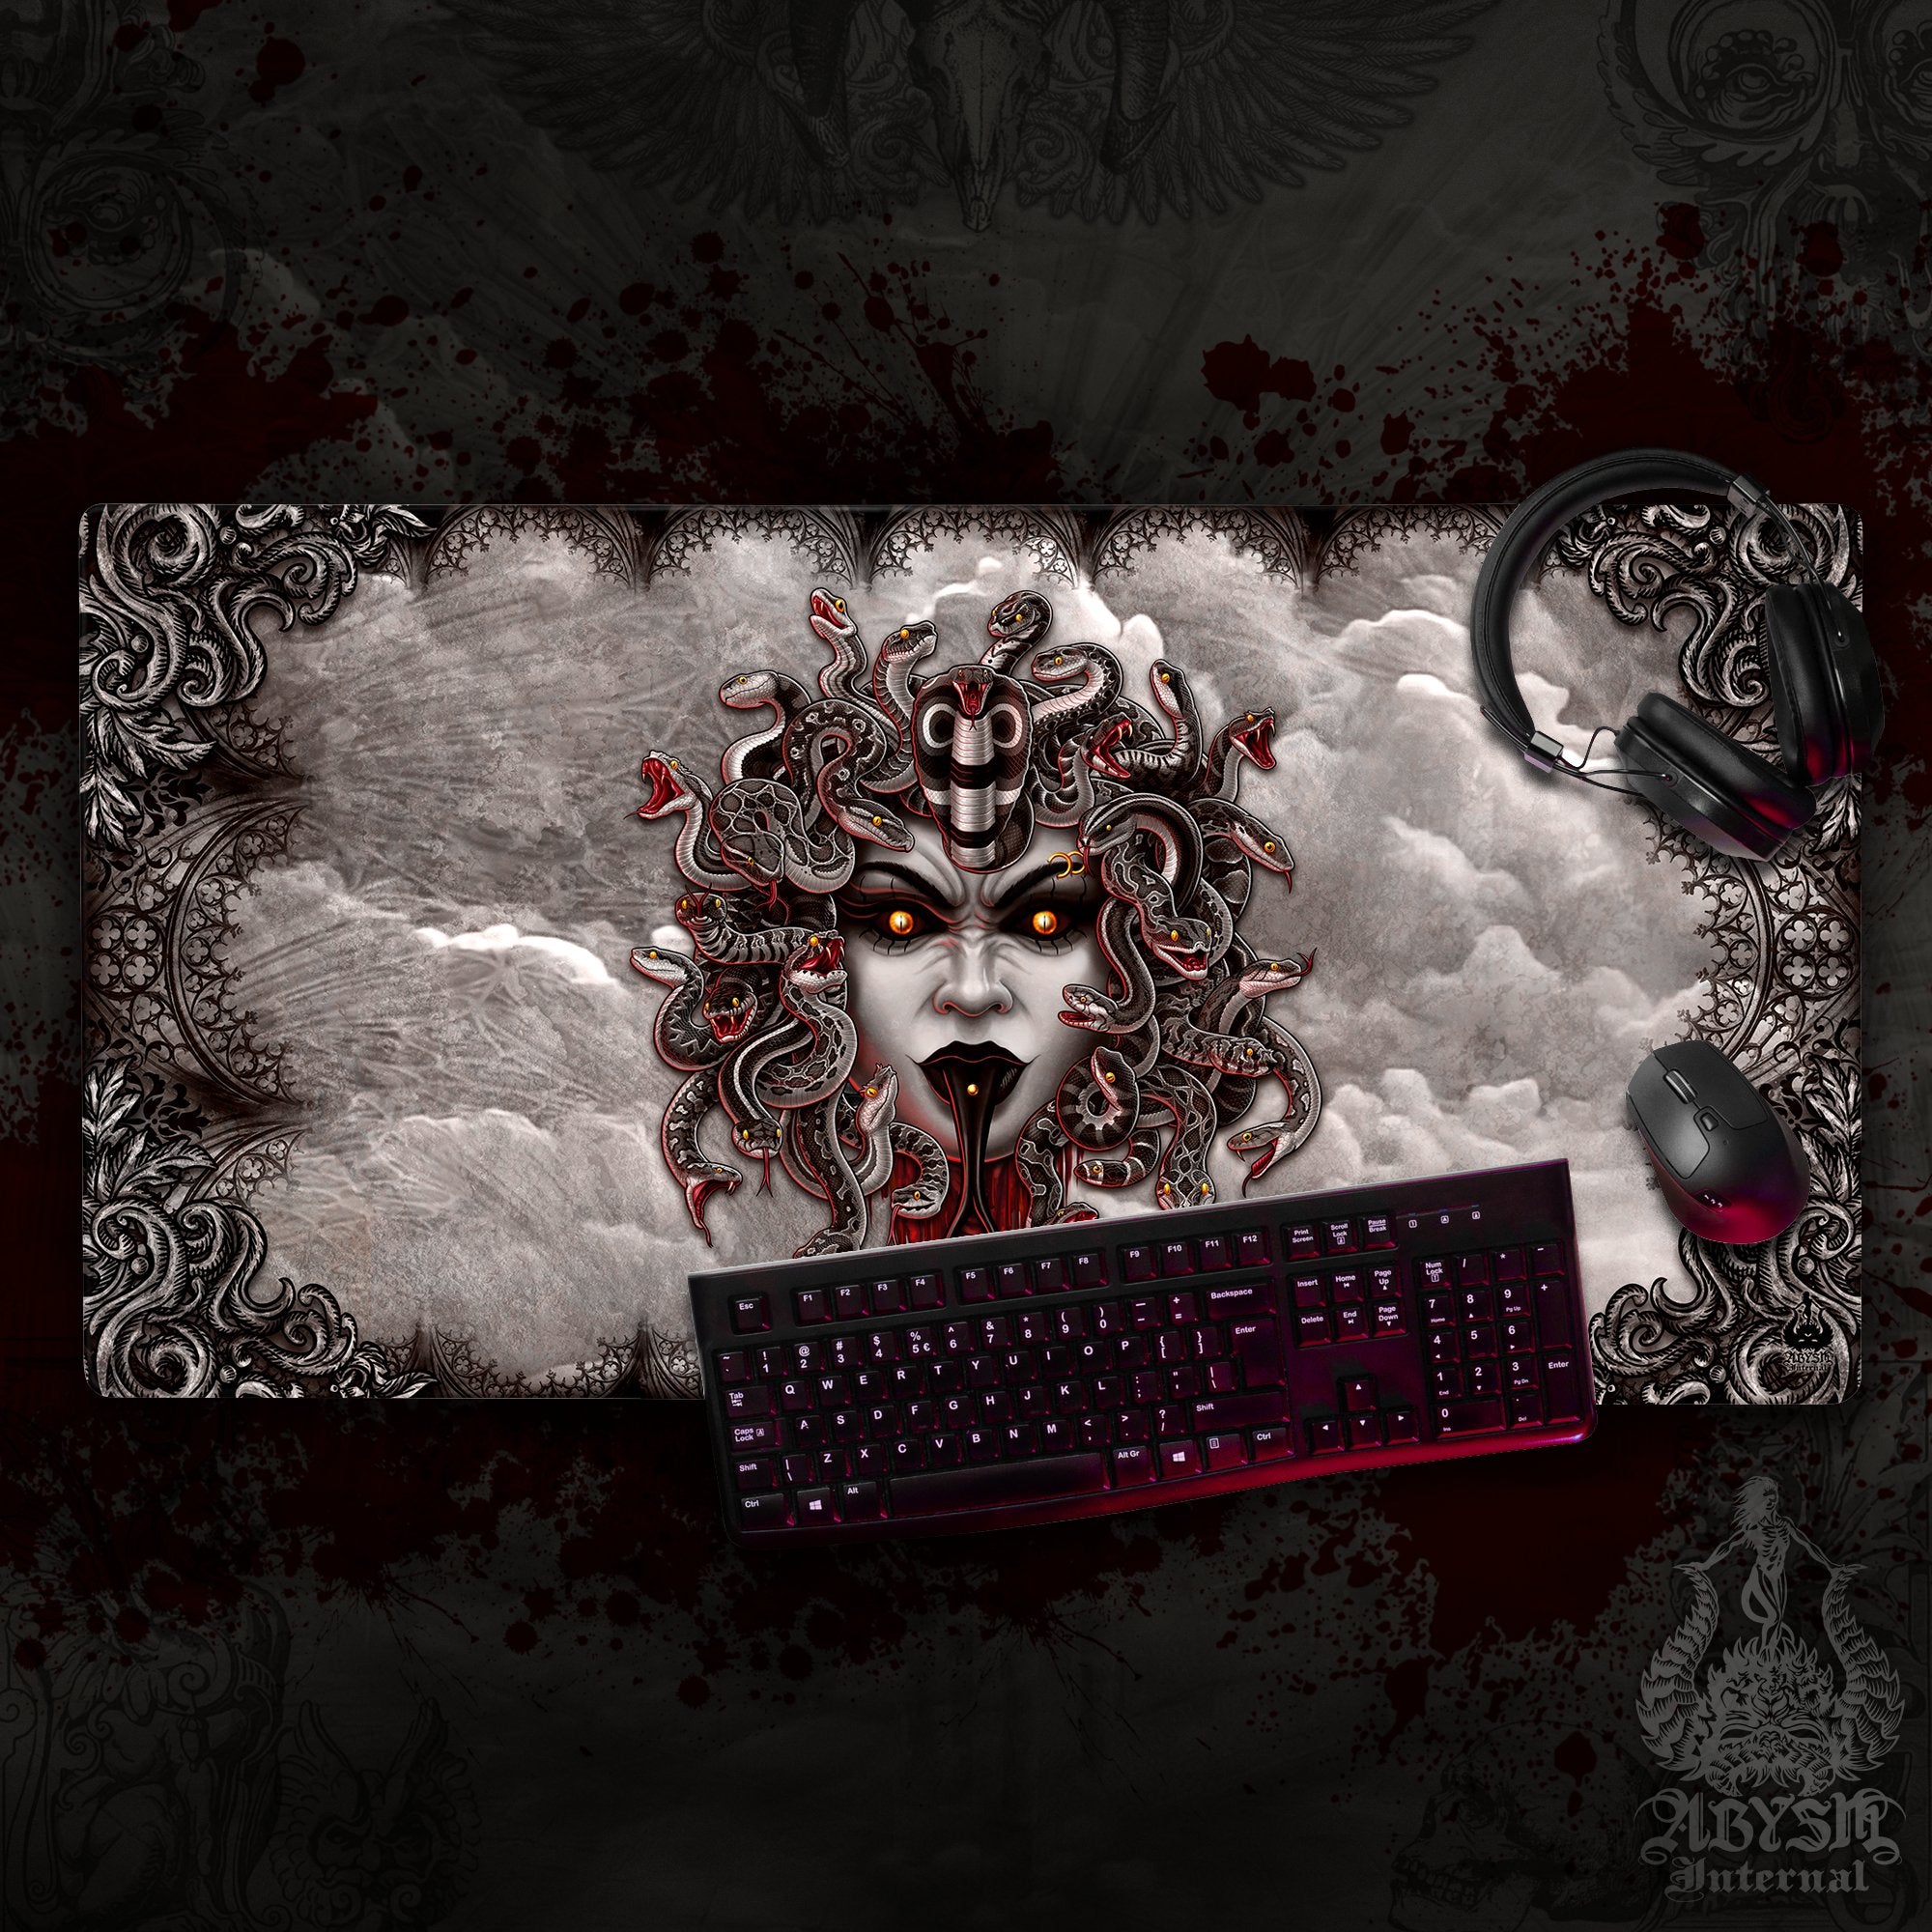 Gothic Horror Gaming Desk Mat, Medusa Mouse Pad, Skull Table Protector Cover, Goth Workpad, Dark Fantasy Art Print - Grey, 4 Face Options - Abysm Internal